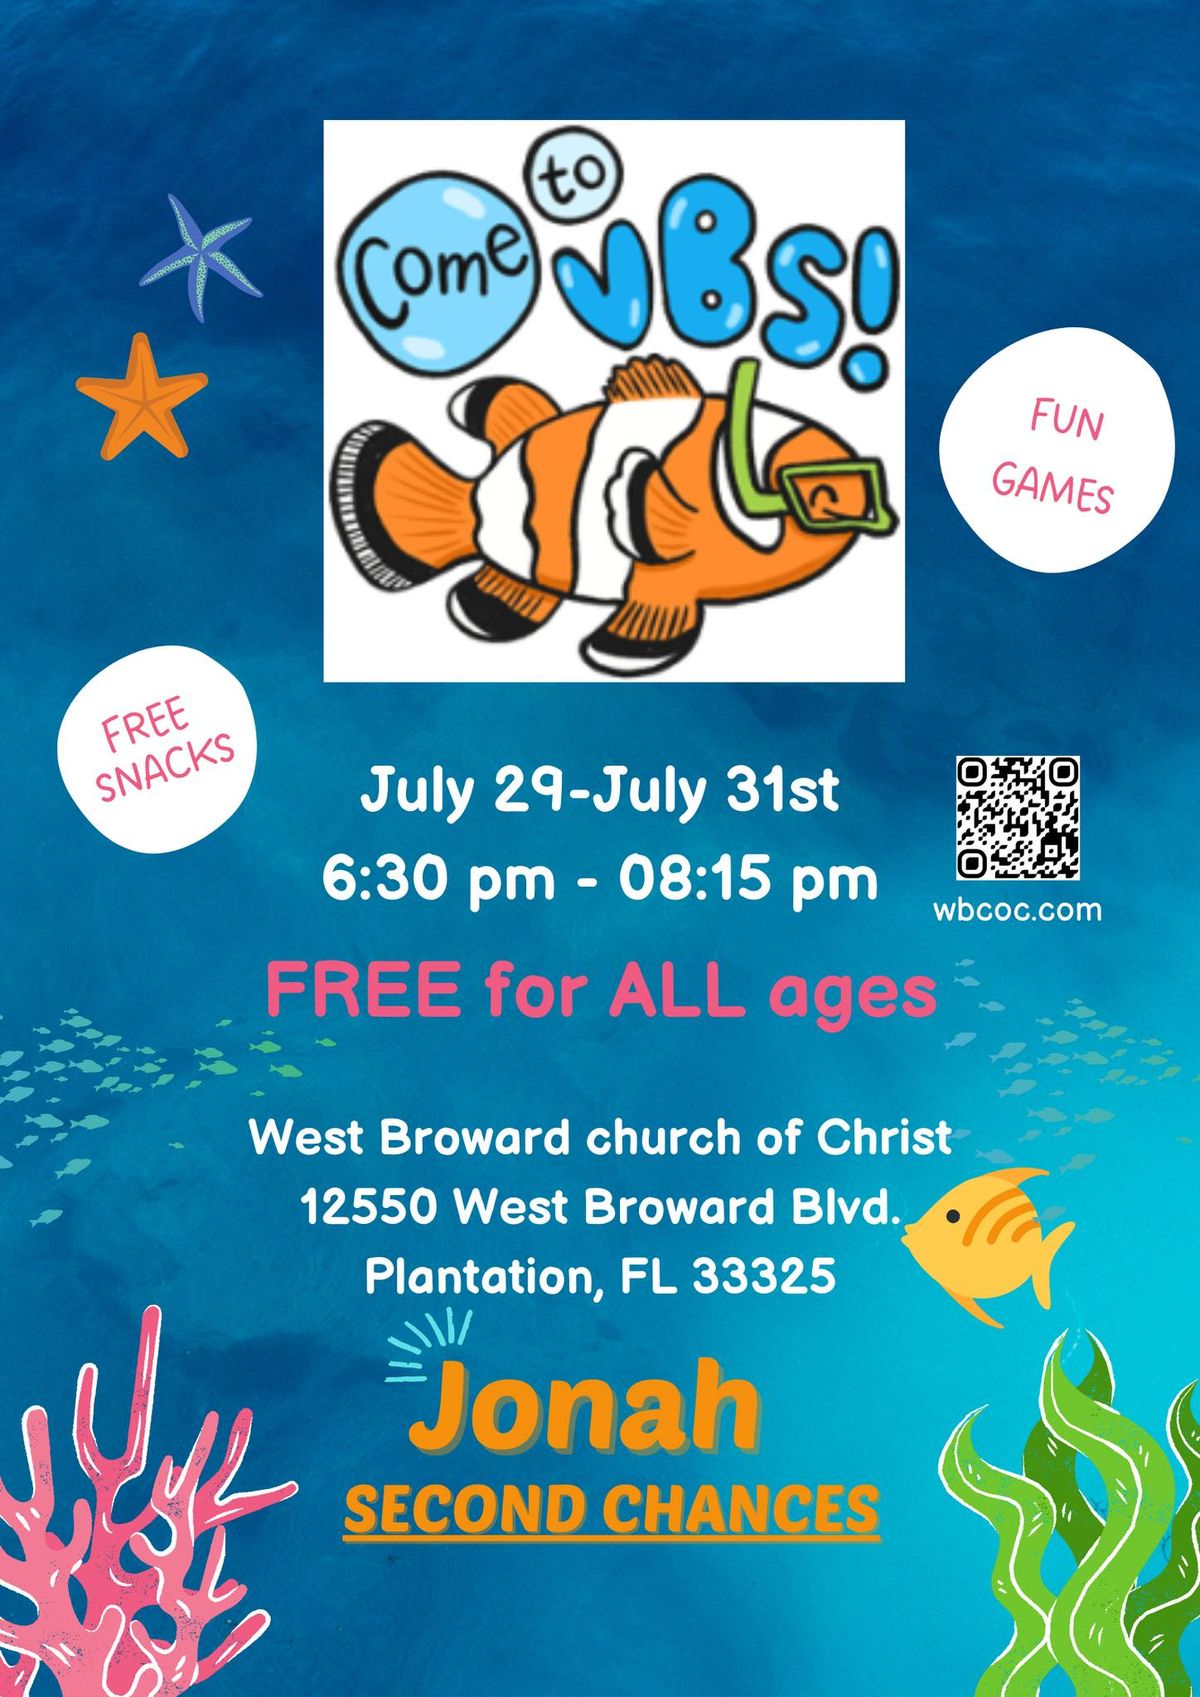 VBS - Fun for All Ages!